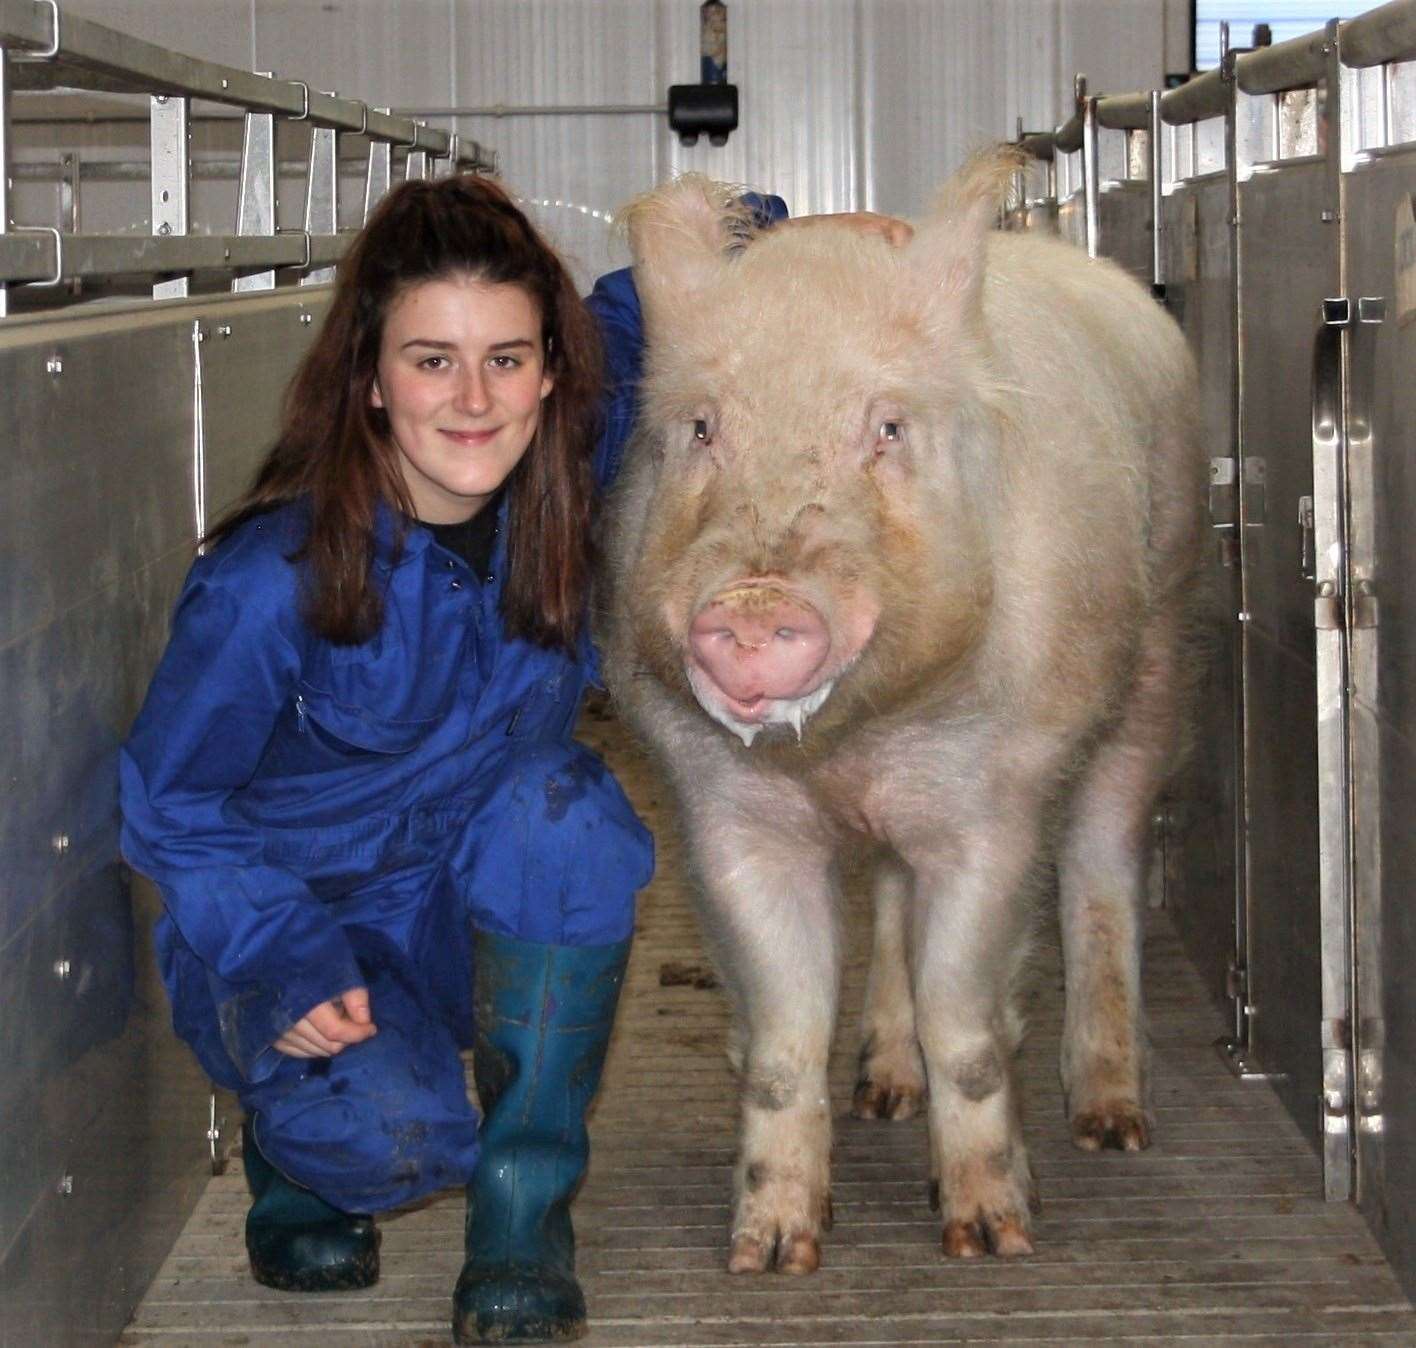 Chloe Shorten with one of her pigs.